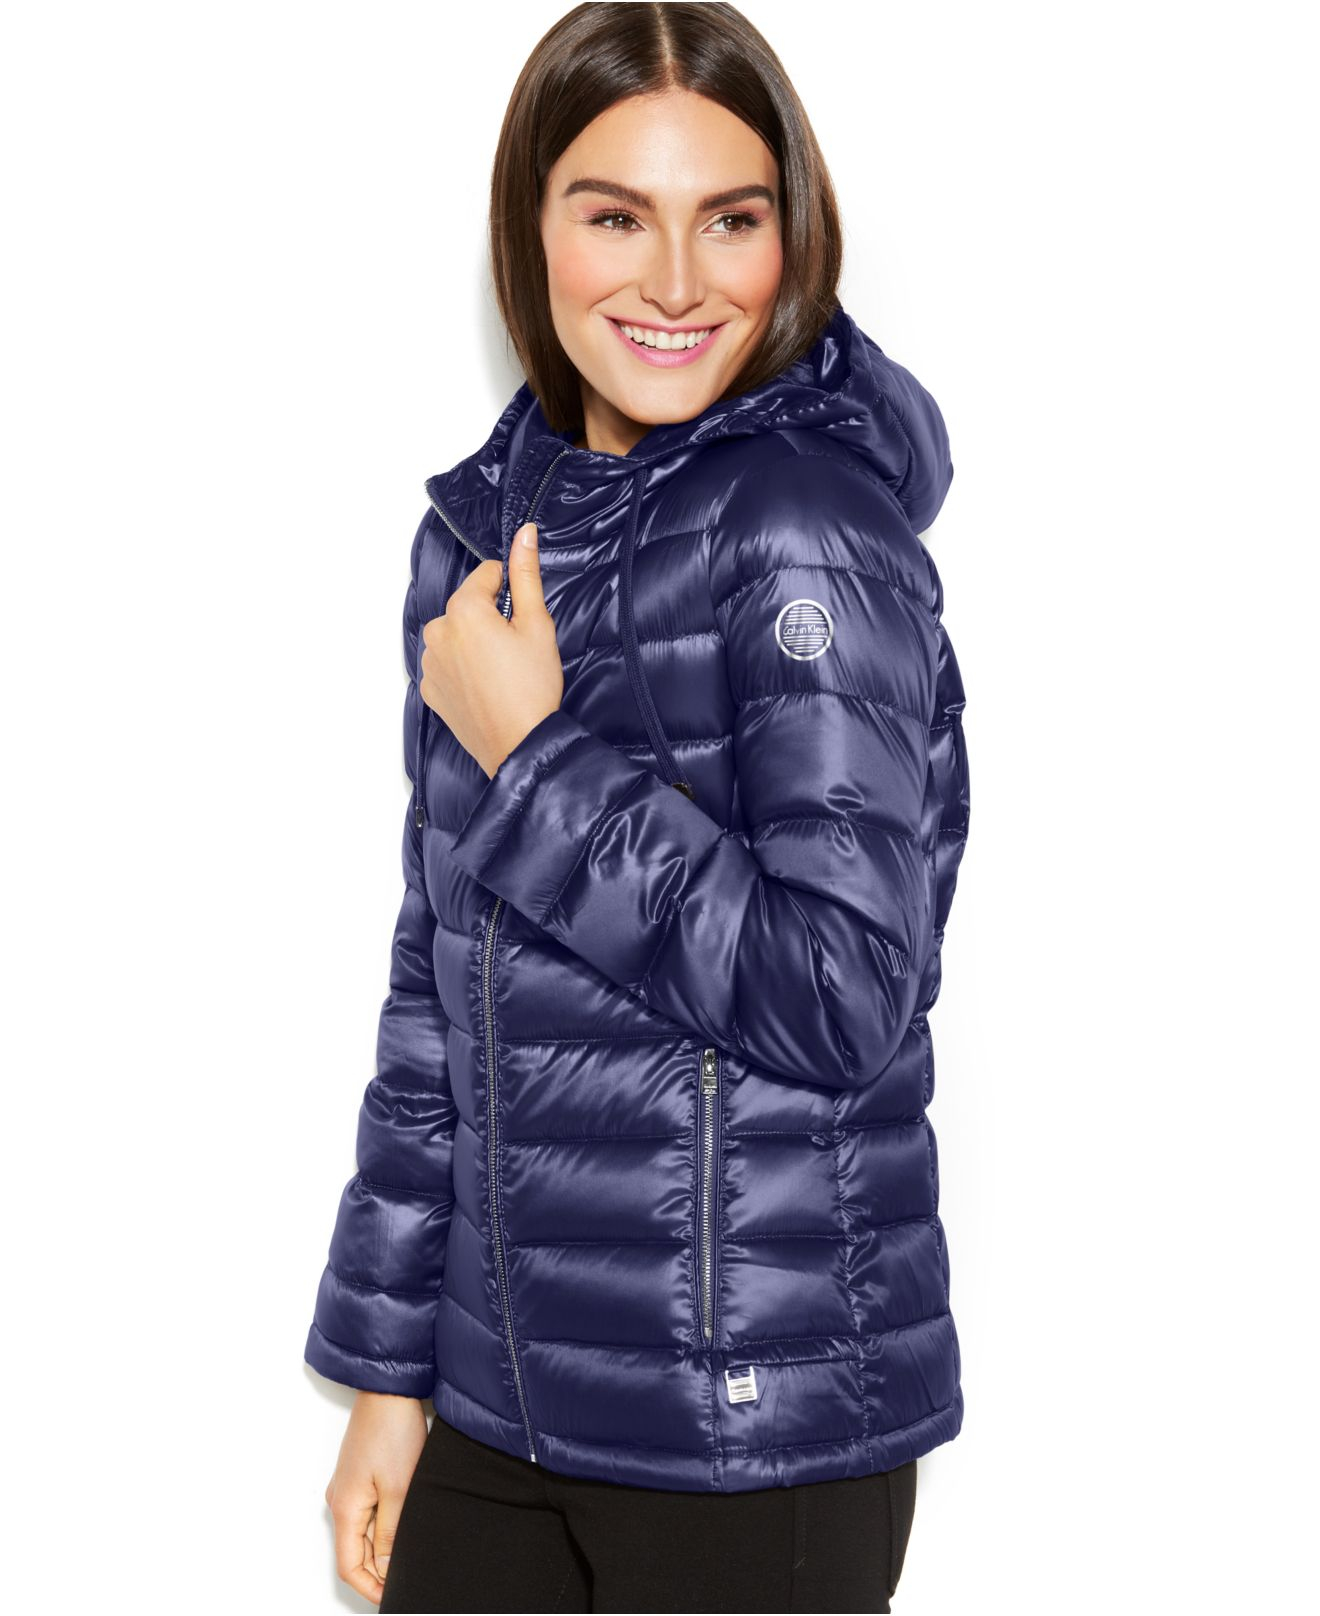 Lyst - Calvin klein Petite Hooded Quilted Packable Down Puffer Coat in Blue